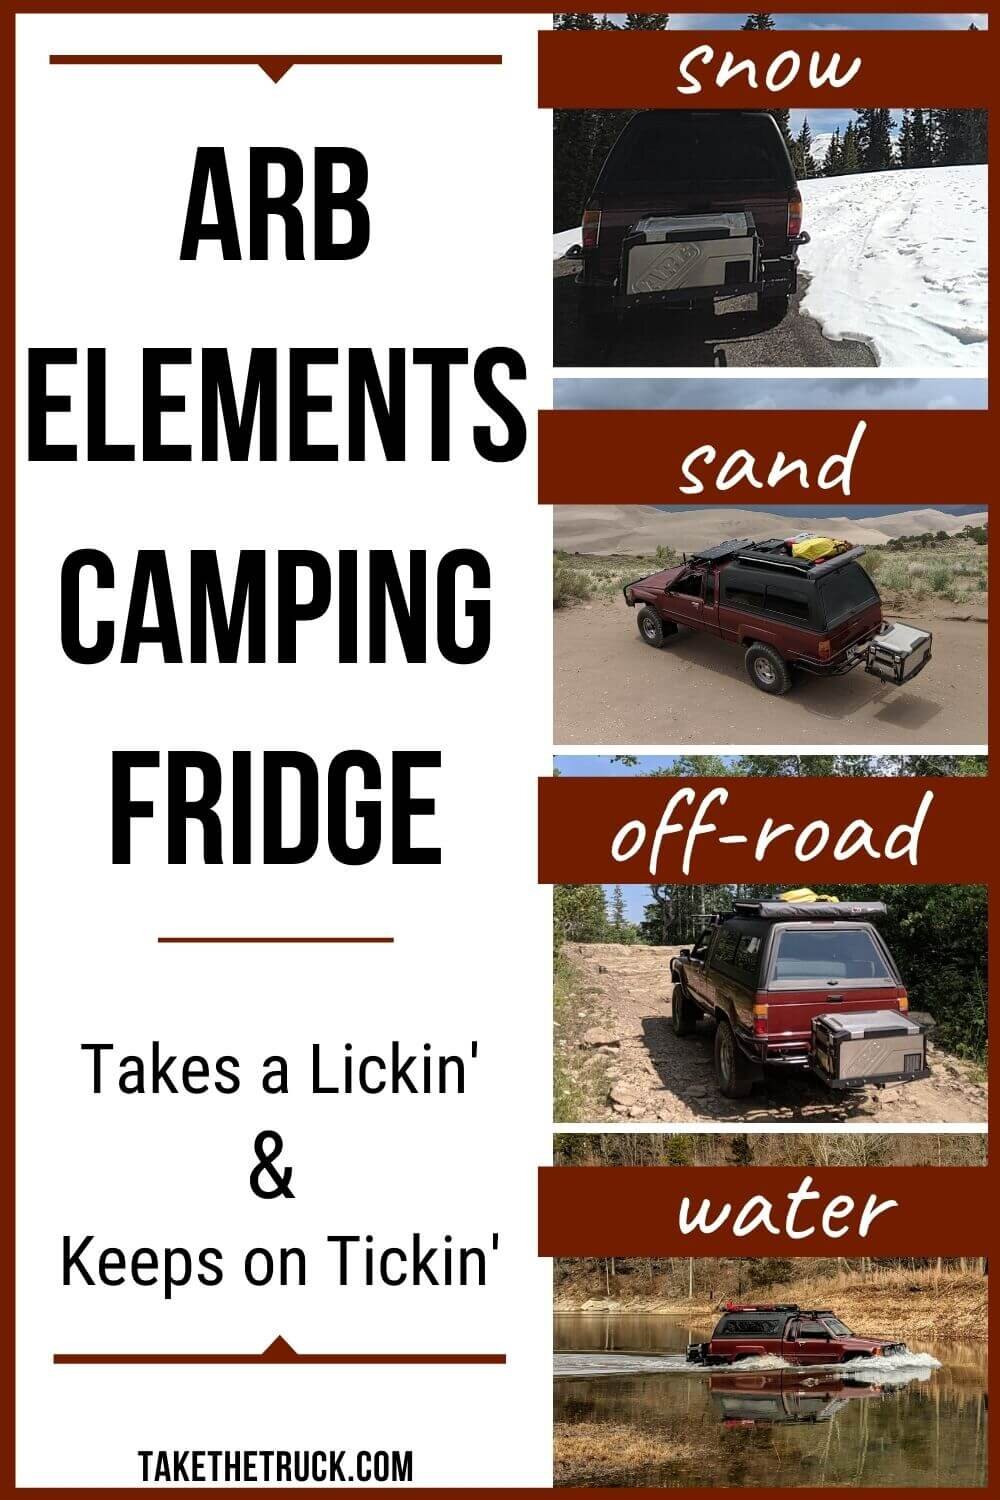 The ARB Elements Fridge is the best overland fridge and a great outdoor fridge for camping - here's why the ARB Elements Fridge is a quality piece of gear for camping and overlanding.